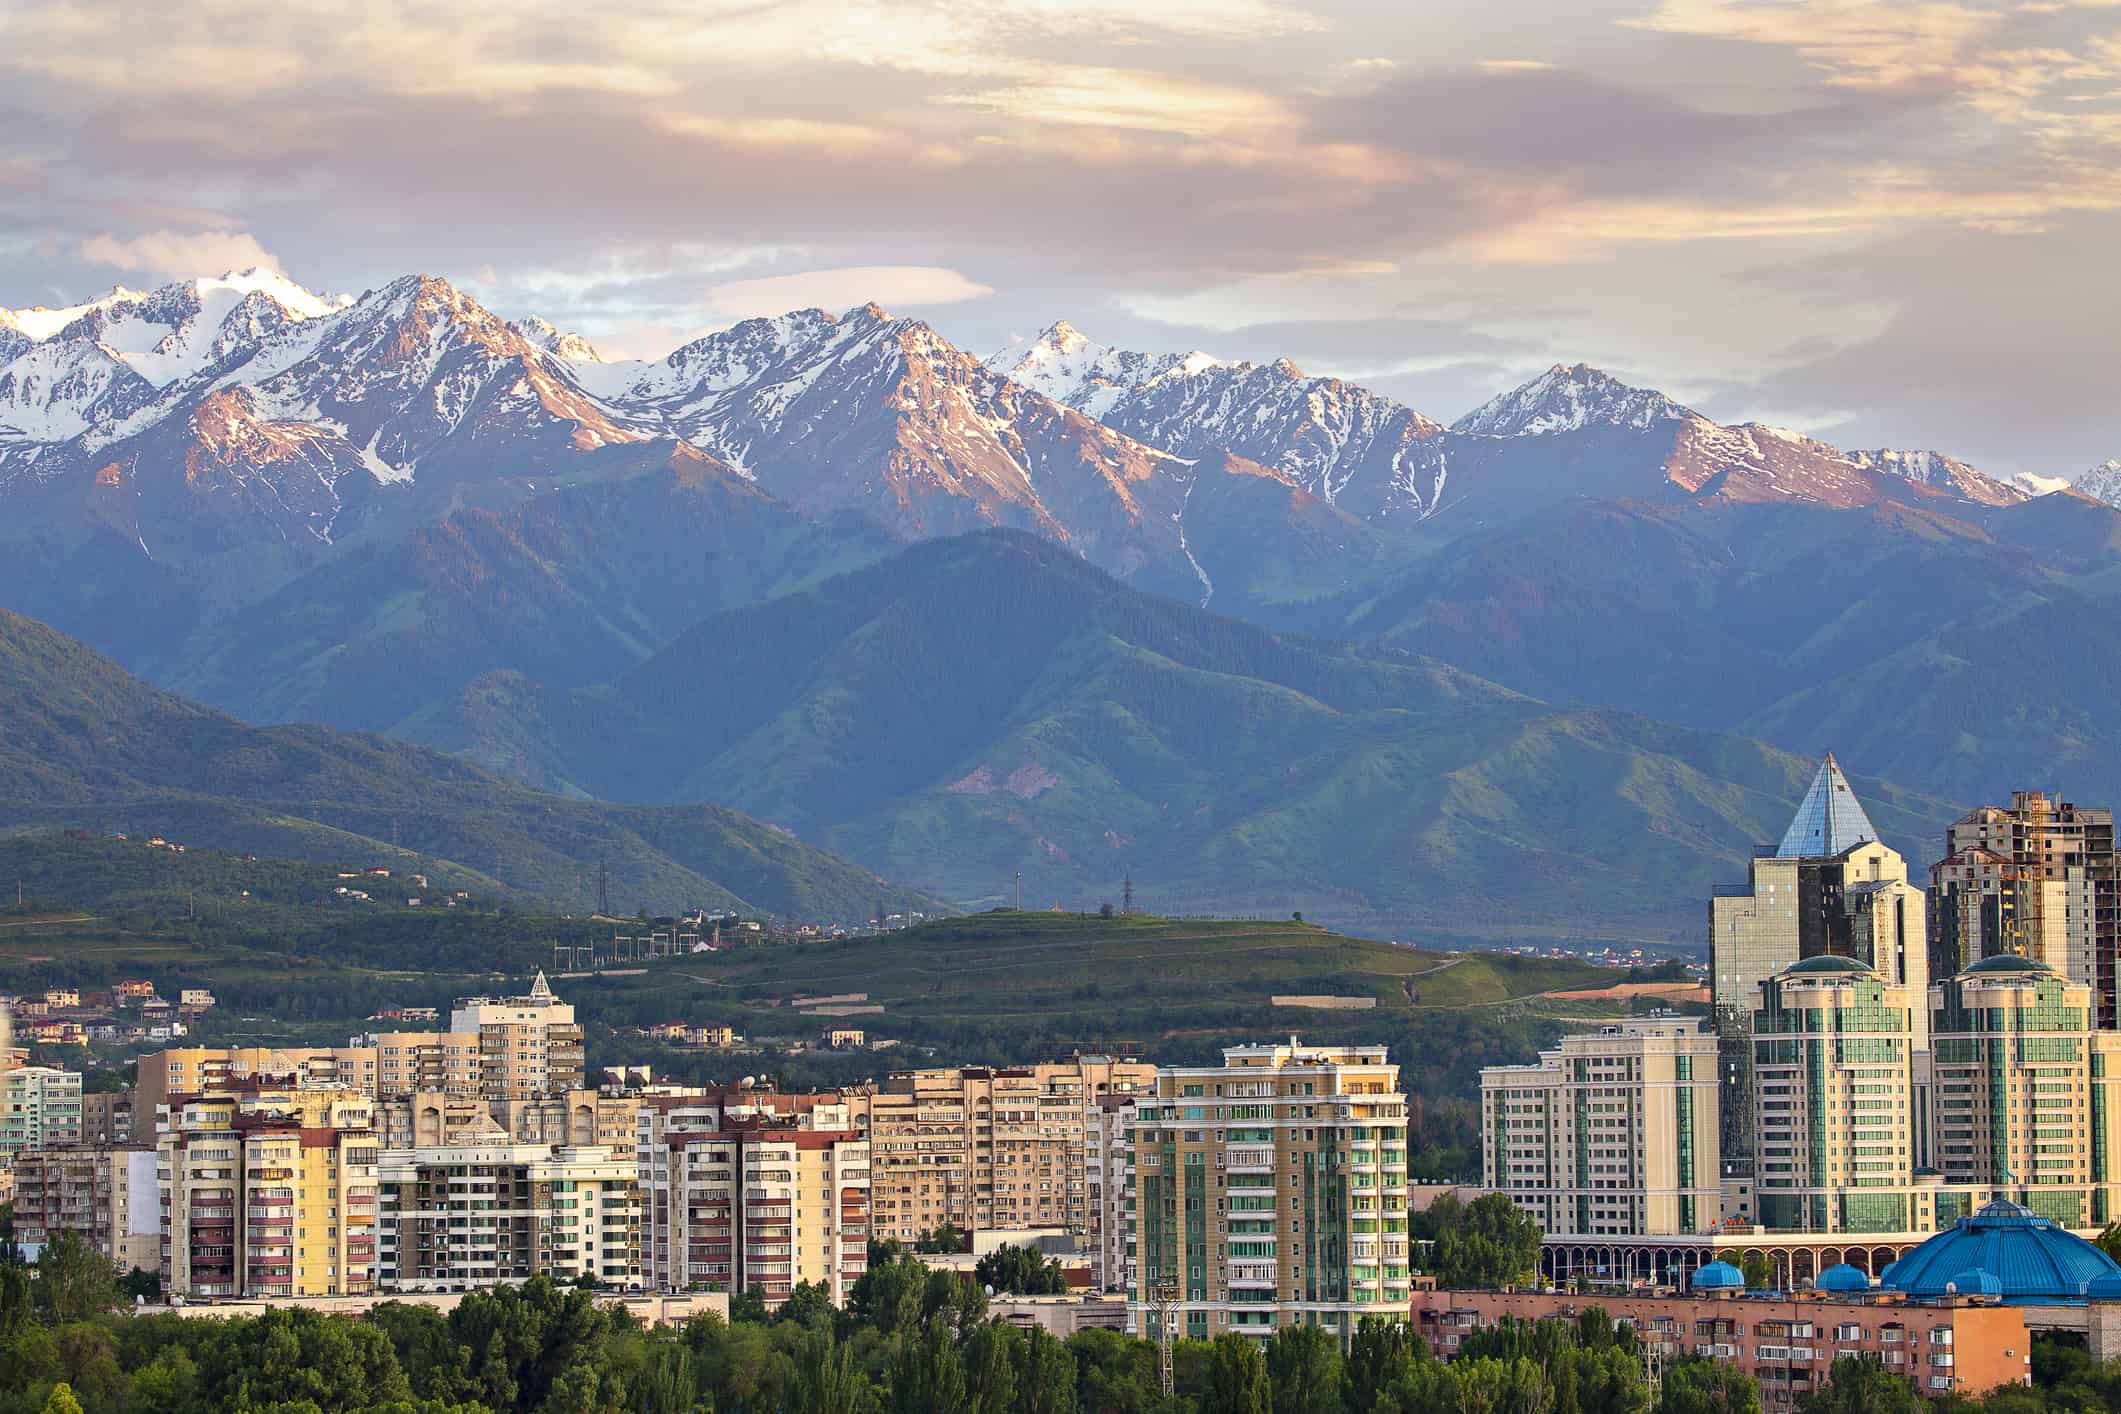 View over Almaty with snow capped mountains in the background, Almaty, Kazakhstan